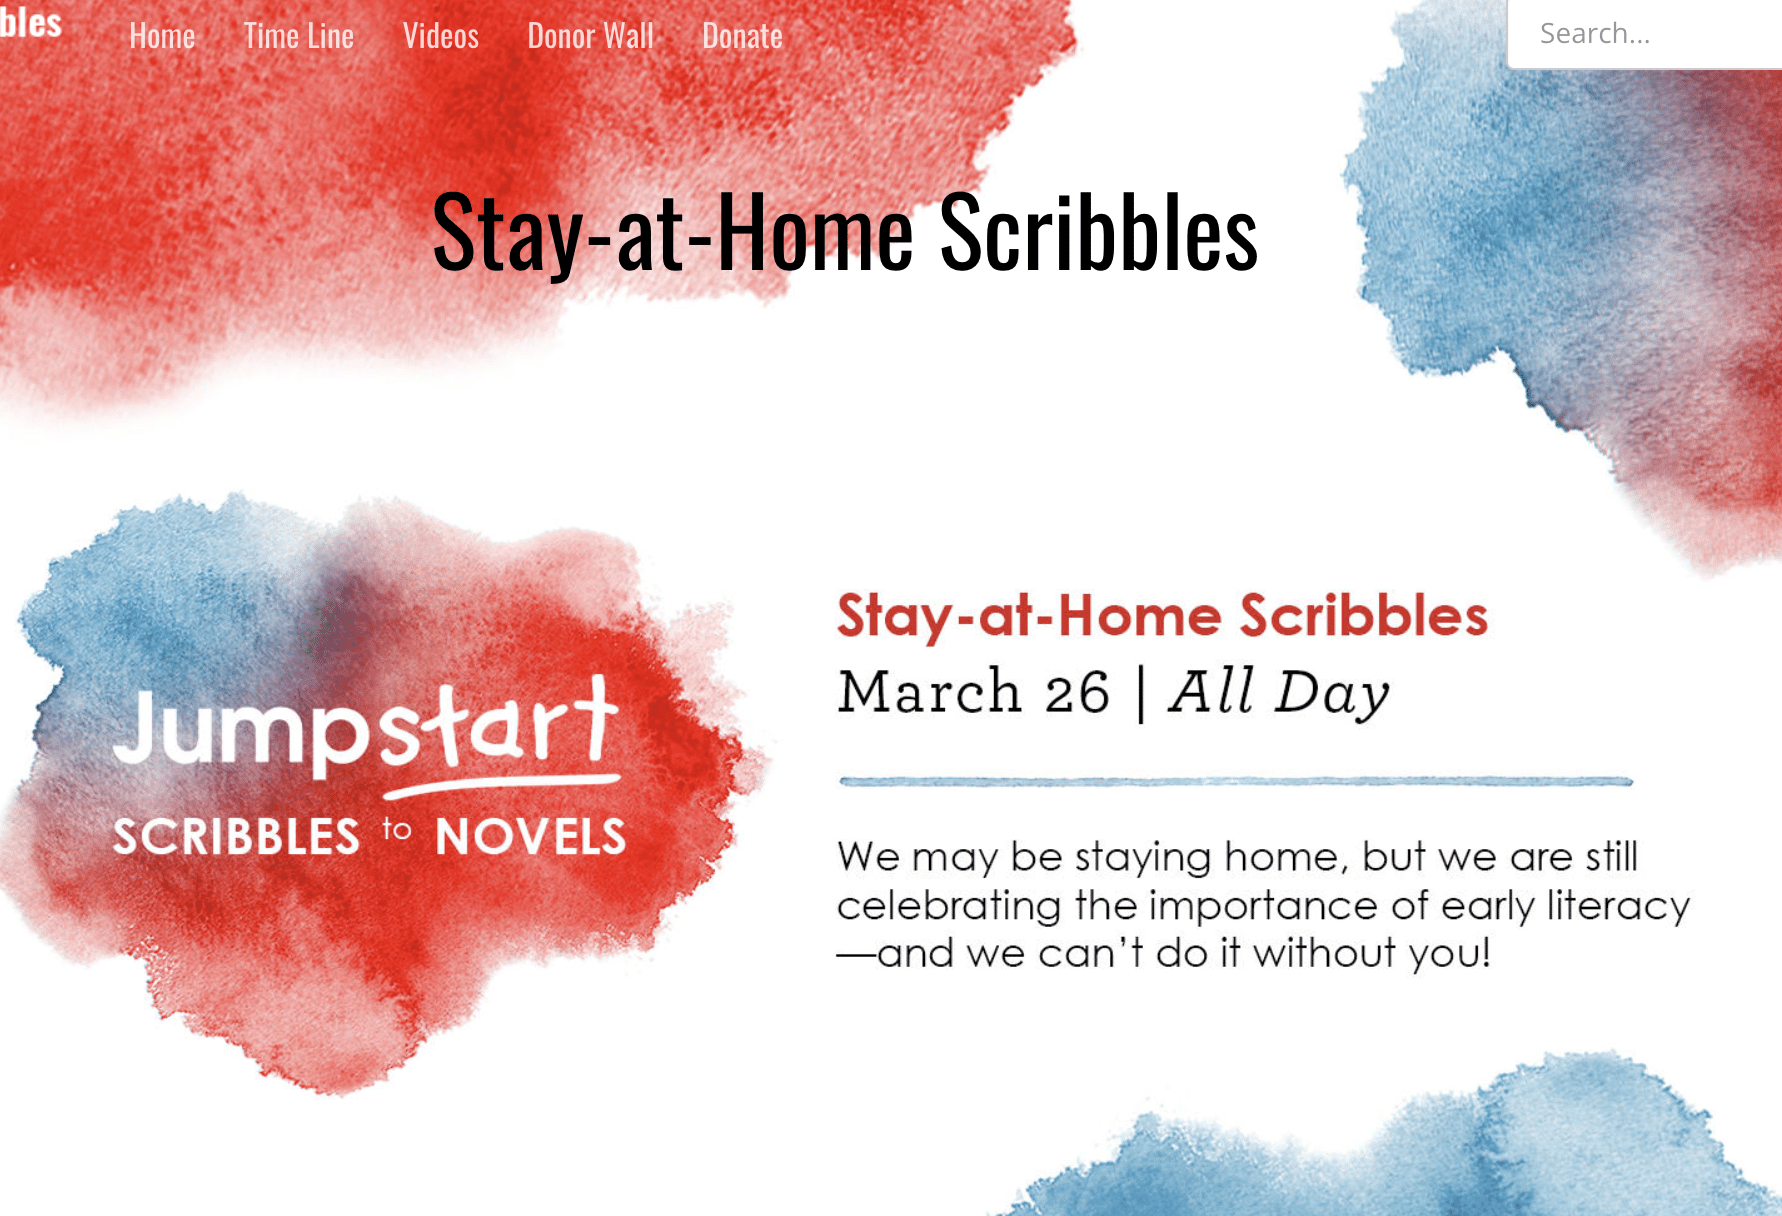 Jumpstart text in a blue and red watercolor style background.